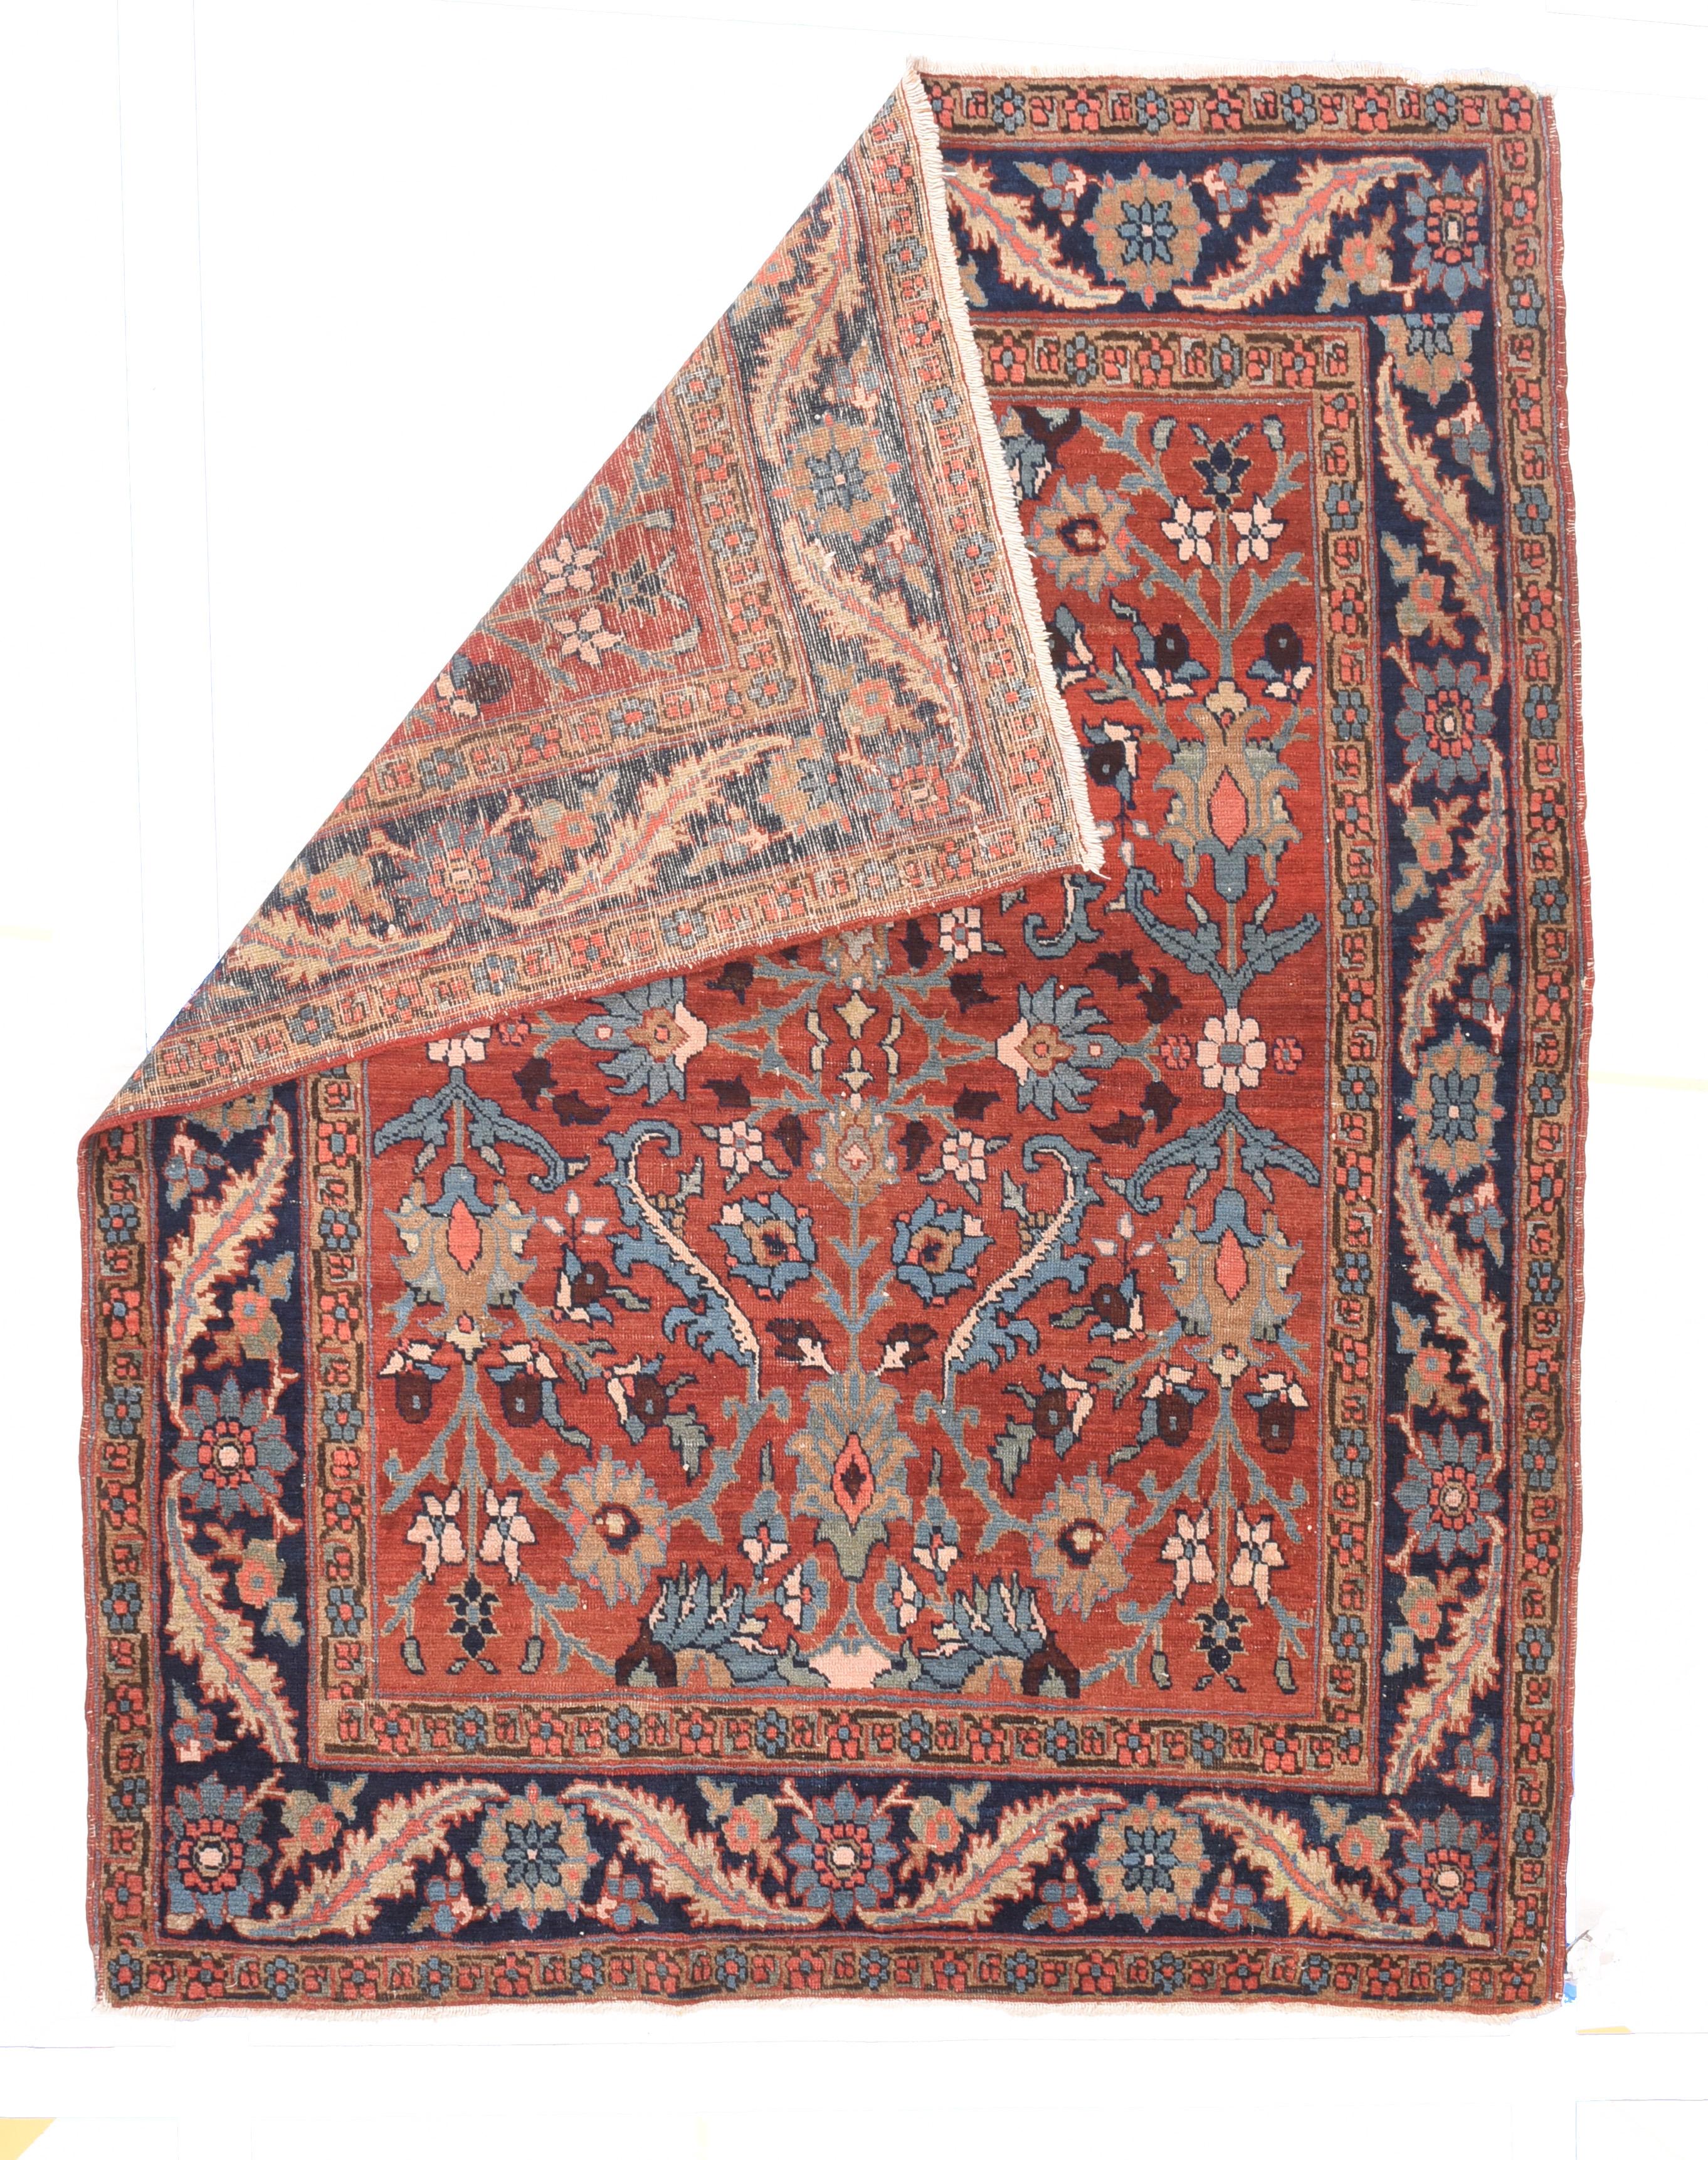 Tribal Fine Antique Heriz Persian Rug, Hand Knotted, circa 1890